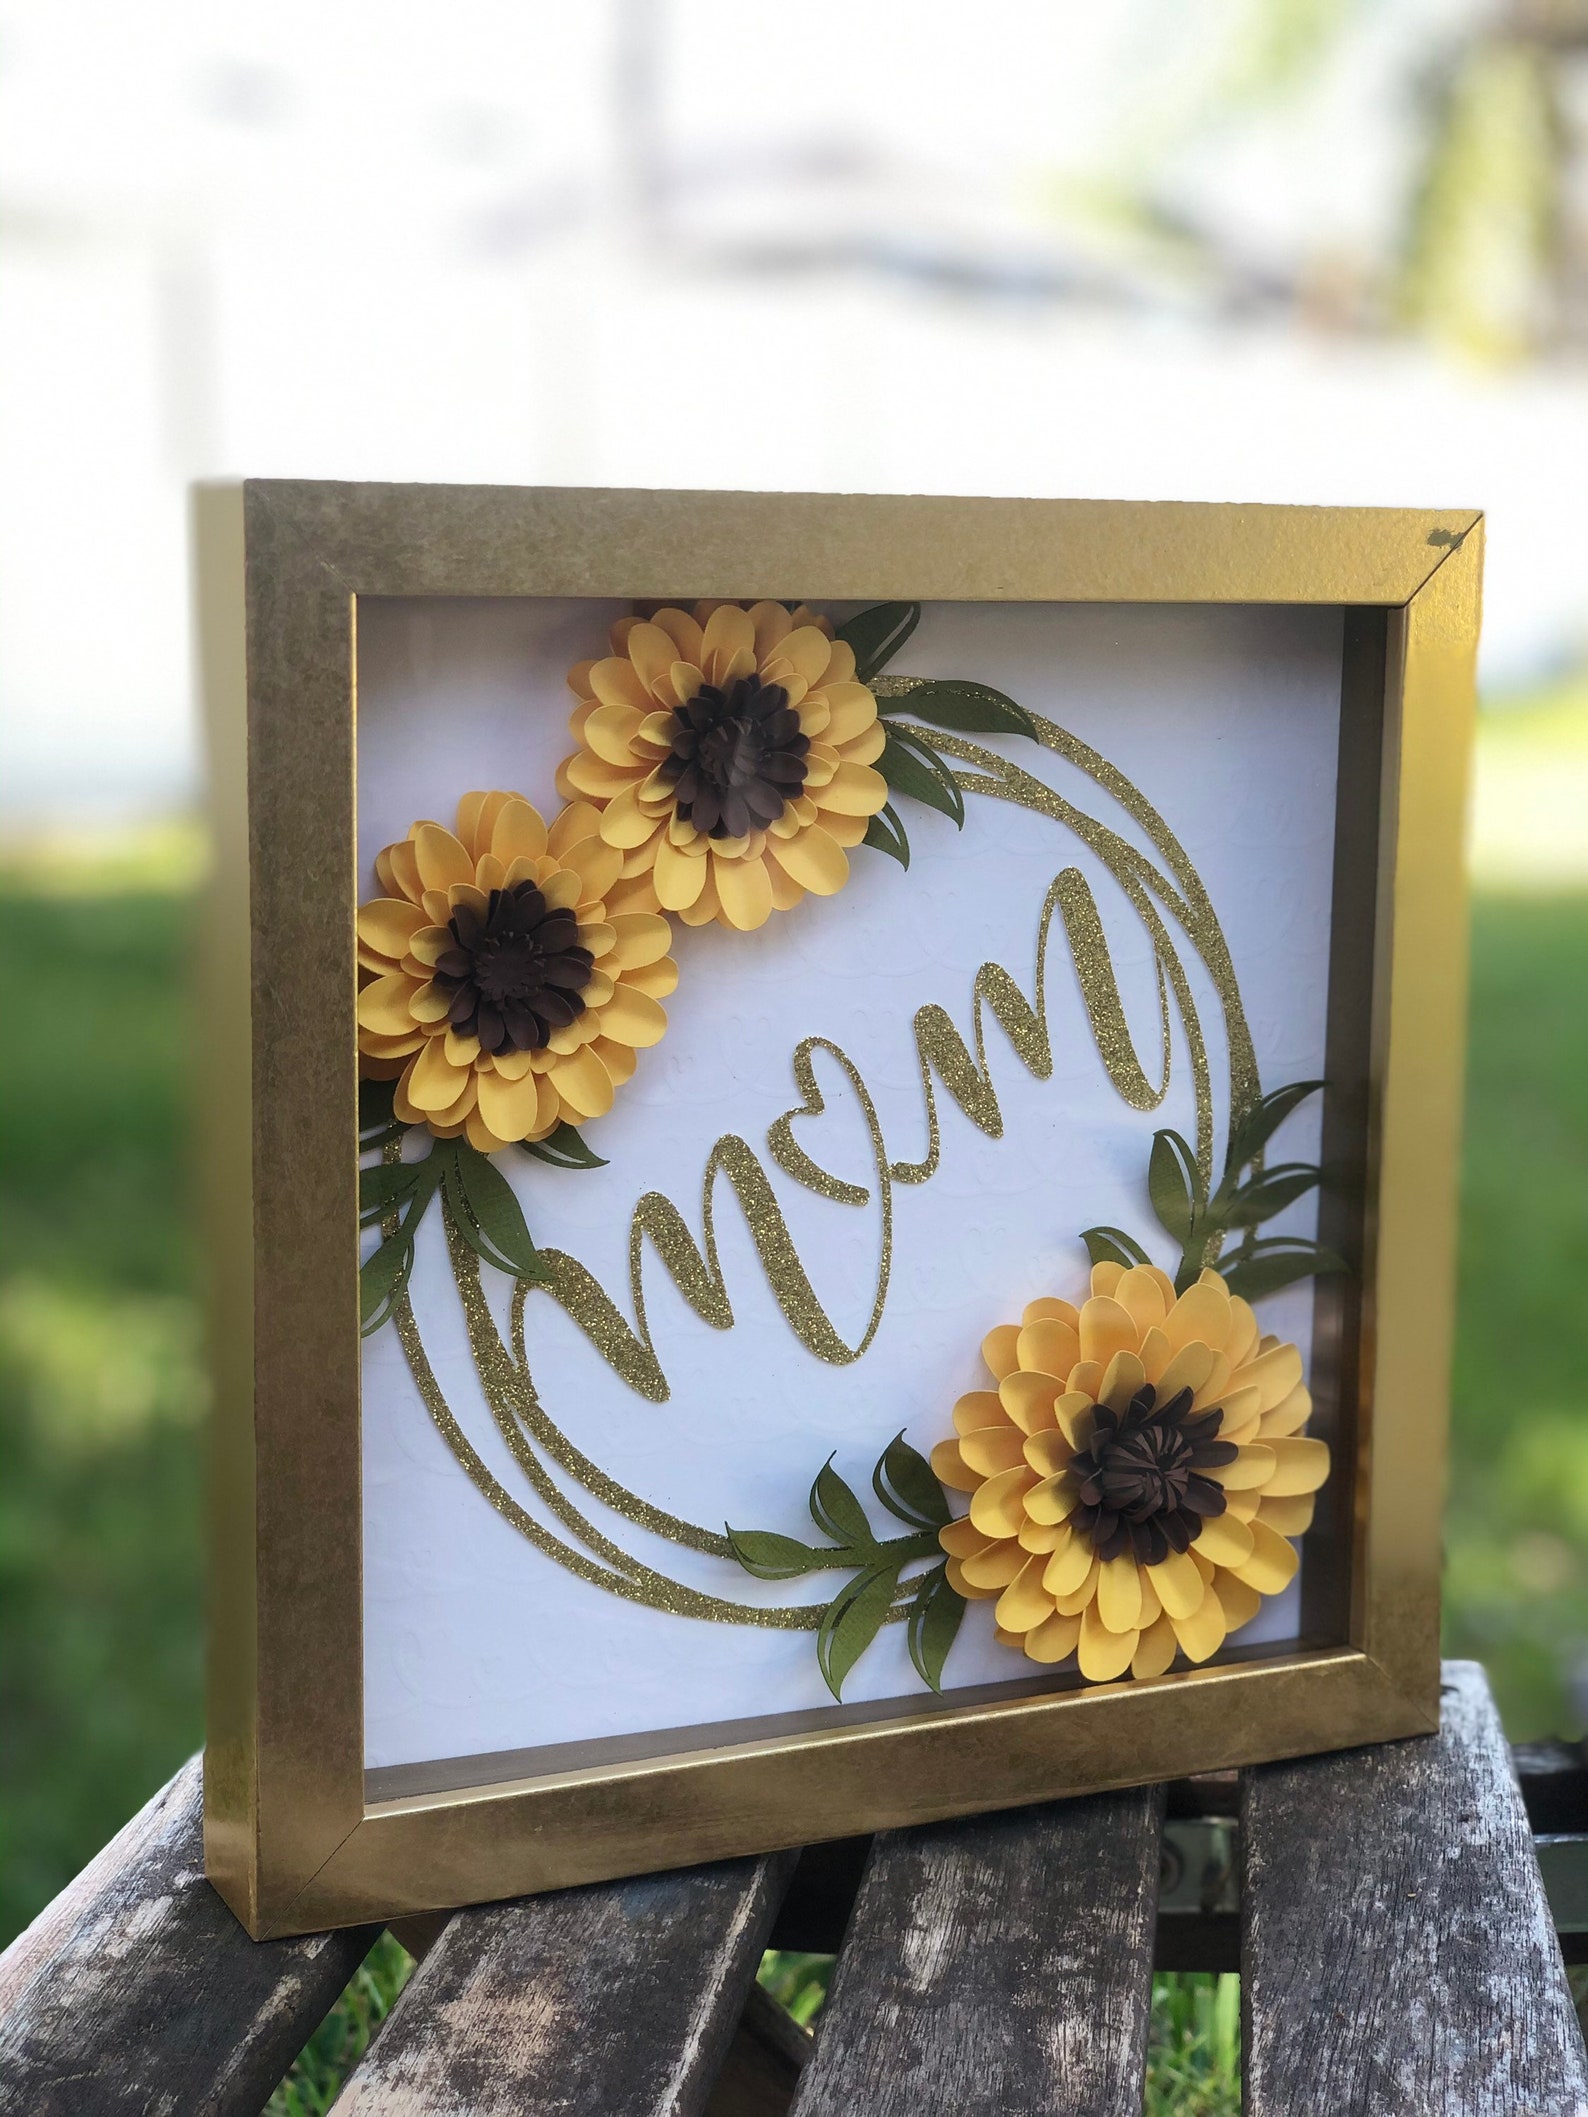 Shadow Box Mothers Day Gift Sunflowers Paper Flower | Etsy